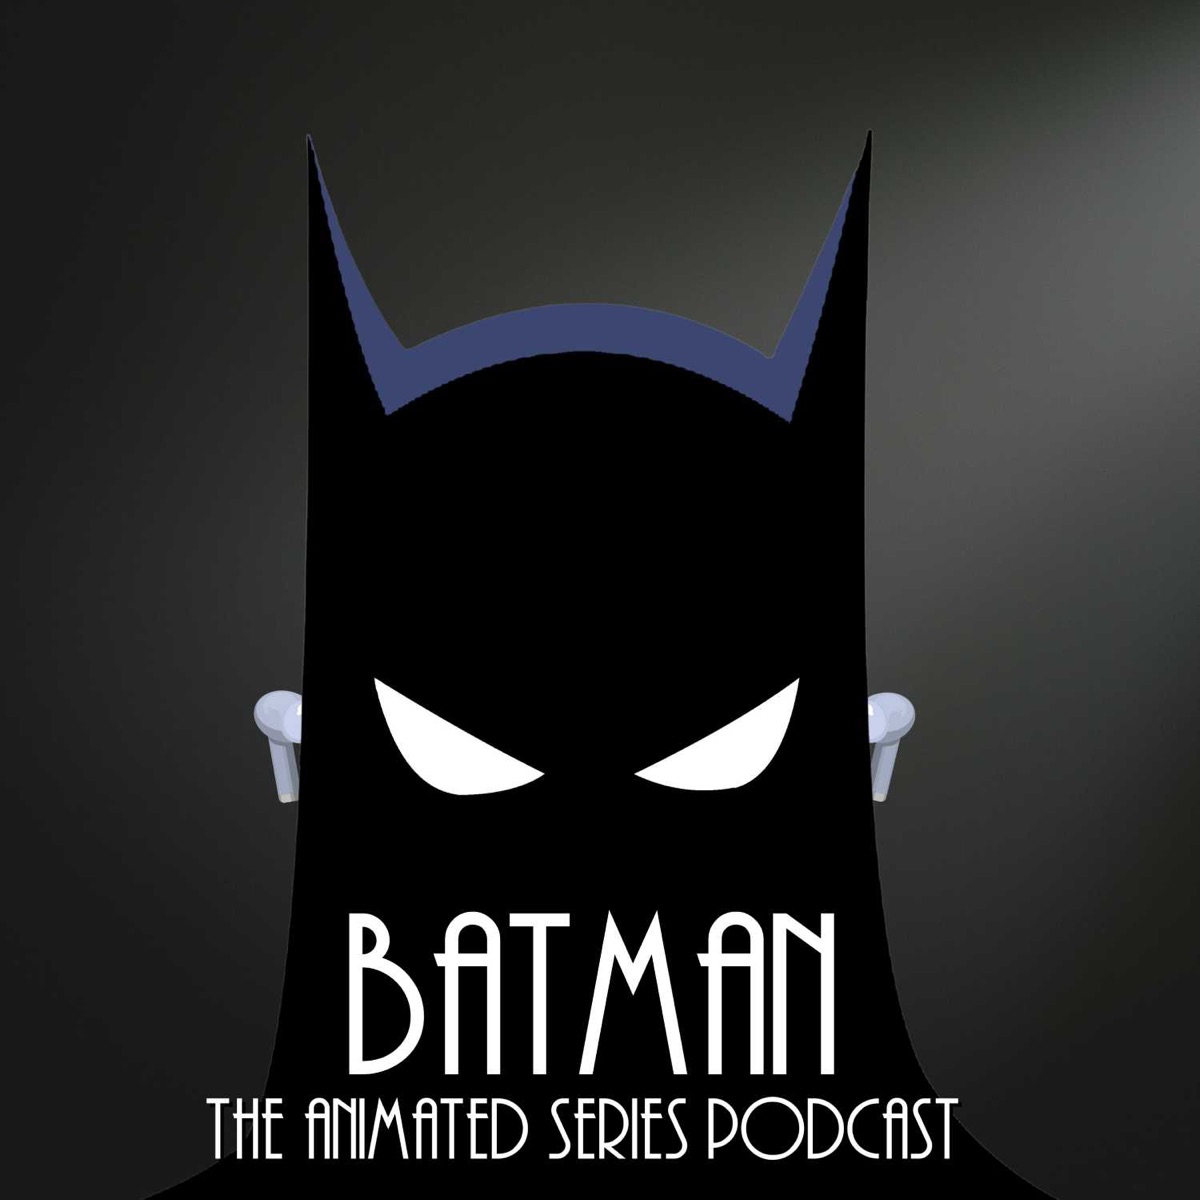 Batman the Animated Series Podcast Podcast – Podtail